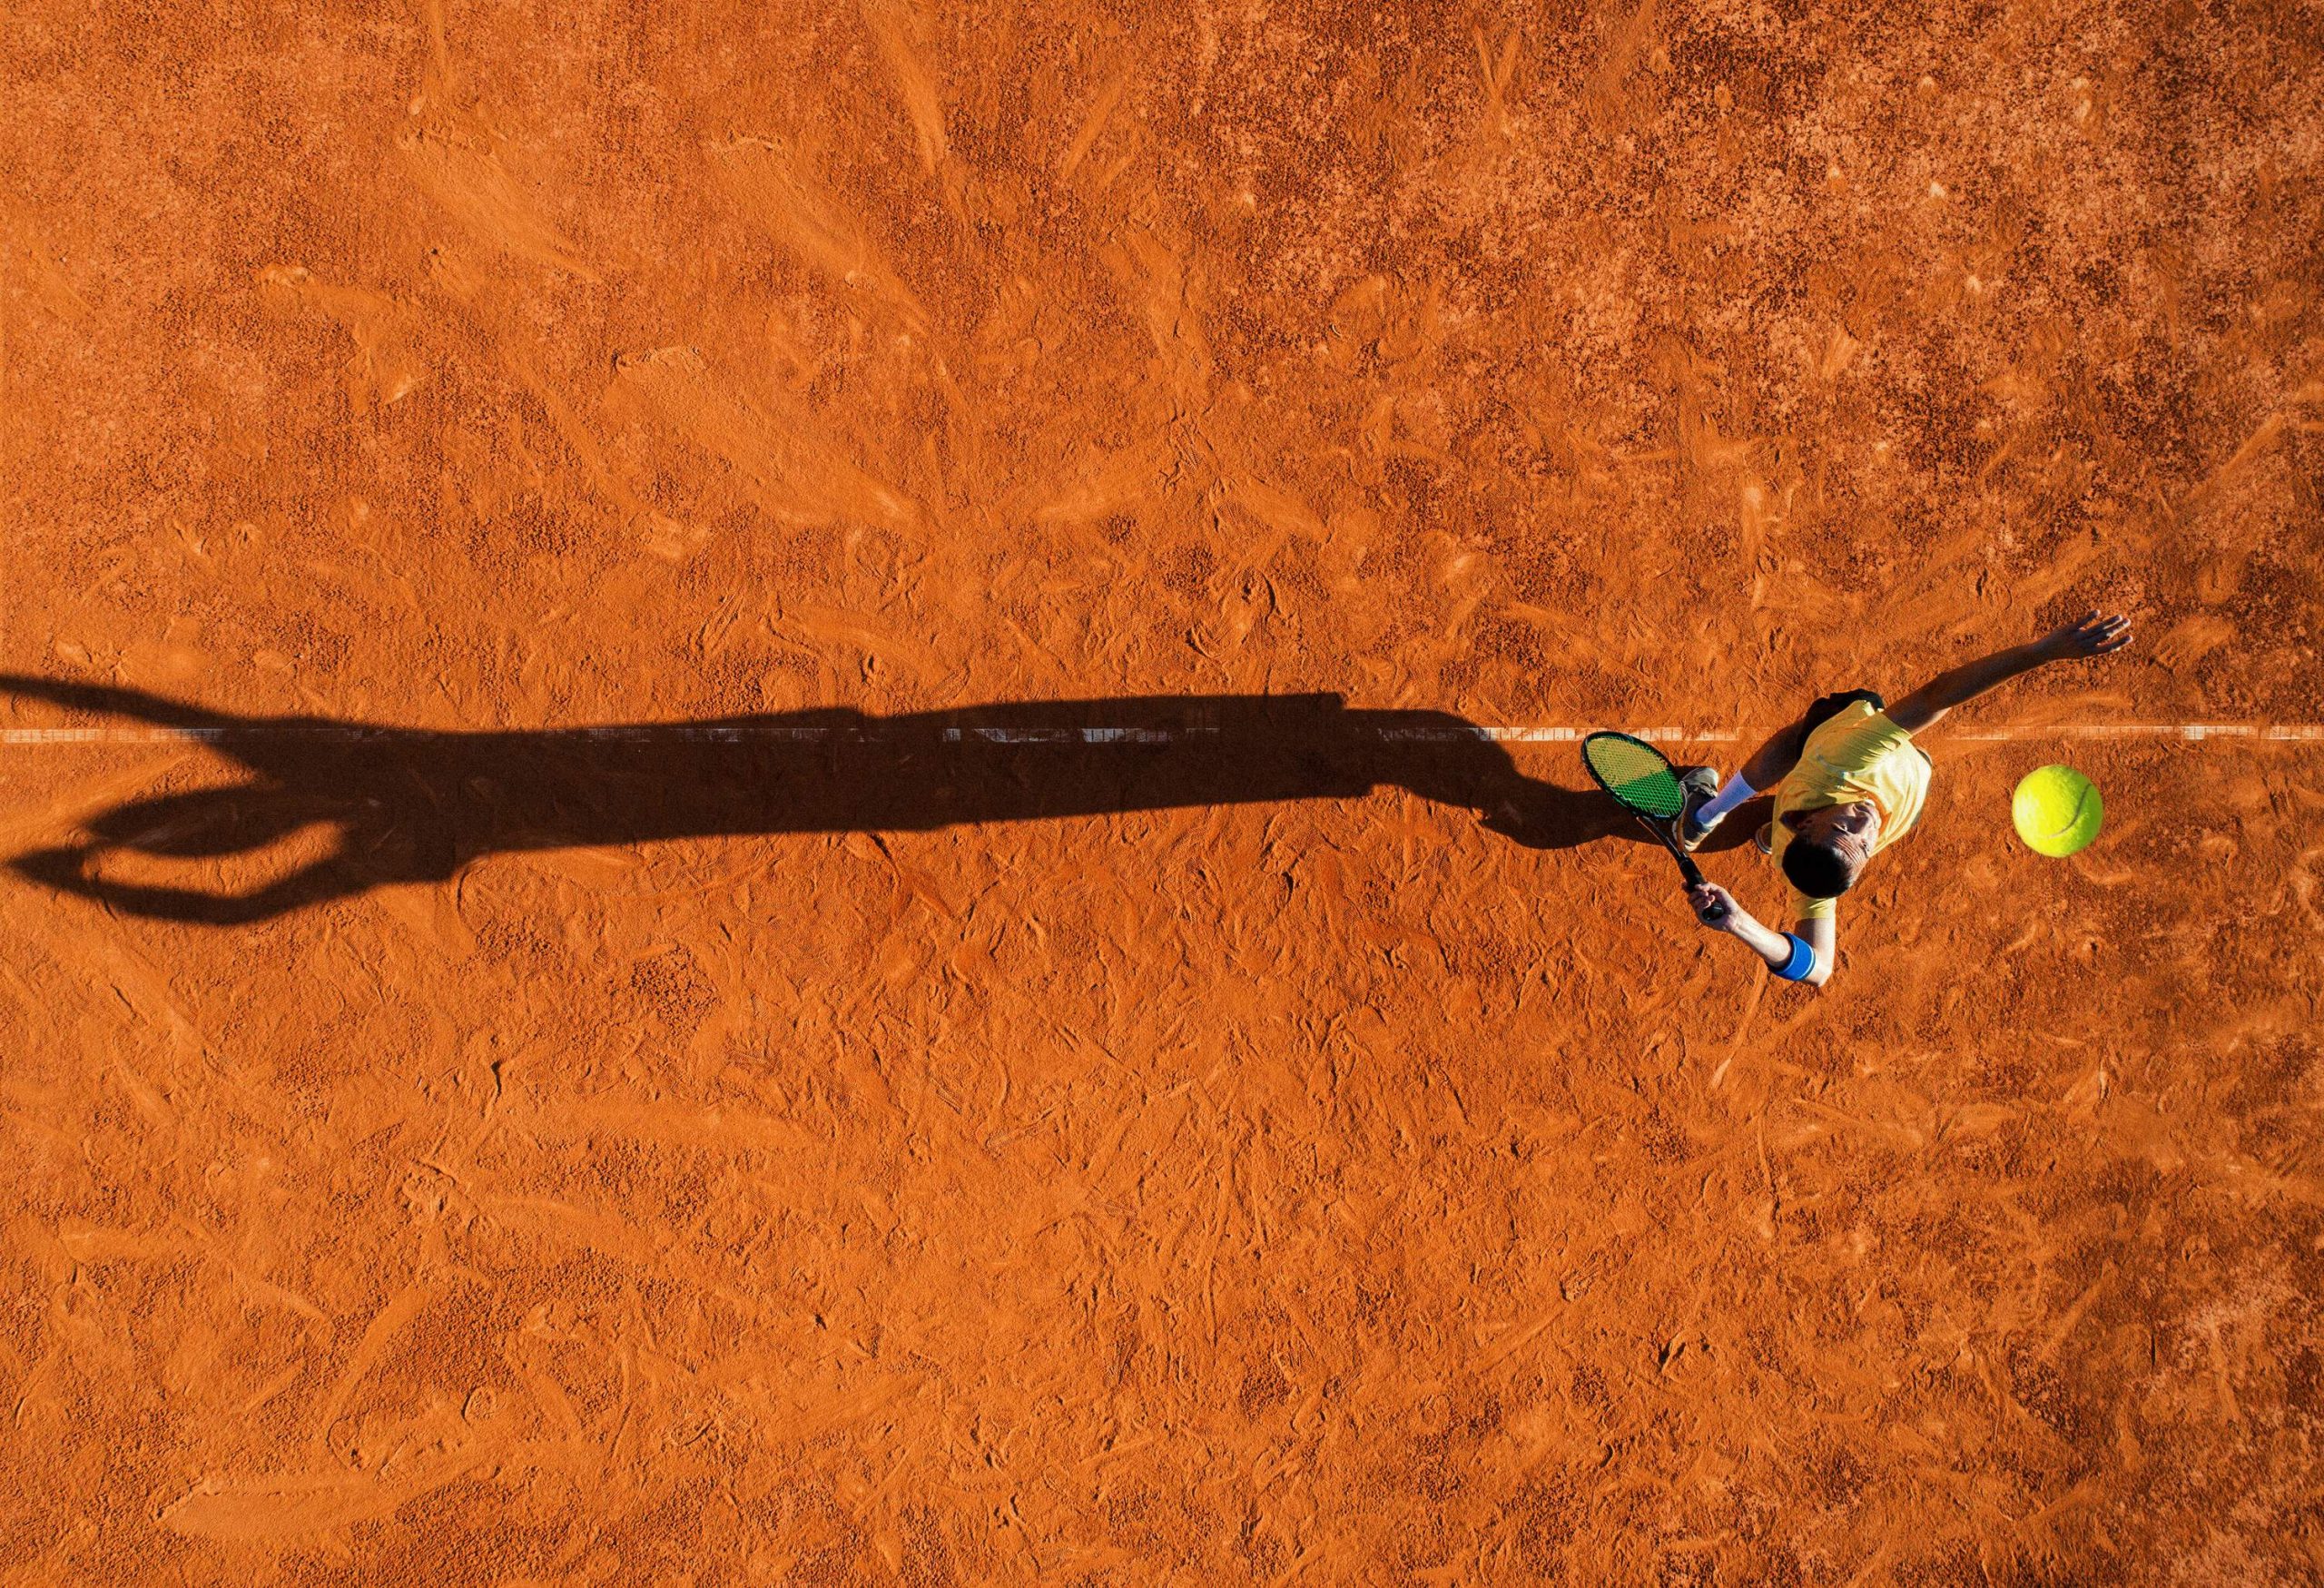 A tennis player serving on a clay court with his shadow cast on the ground.